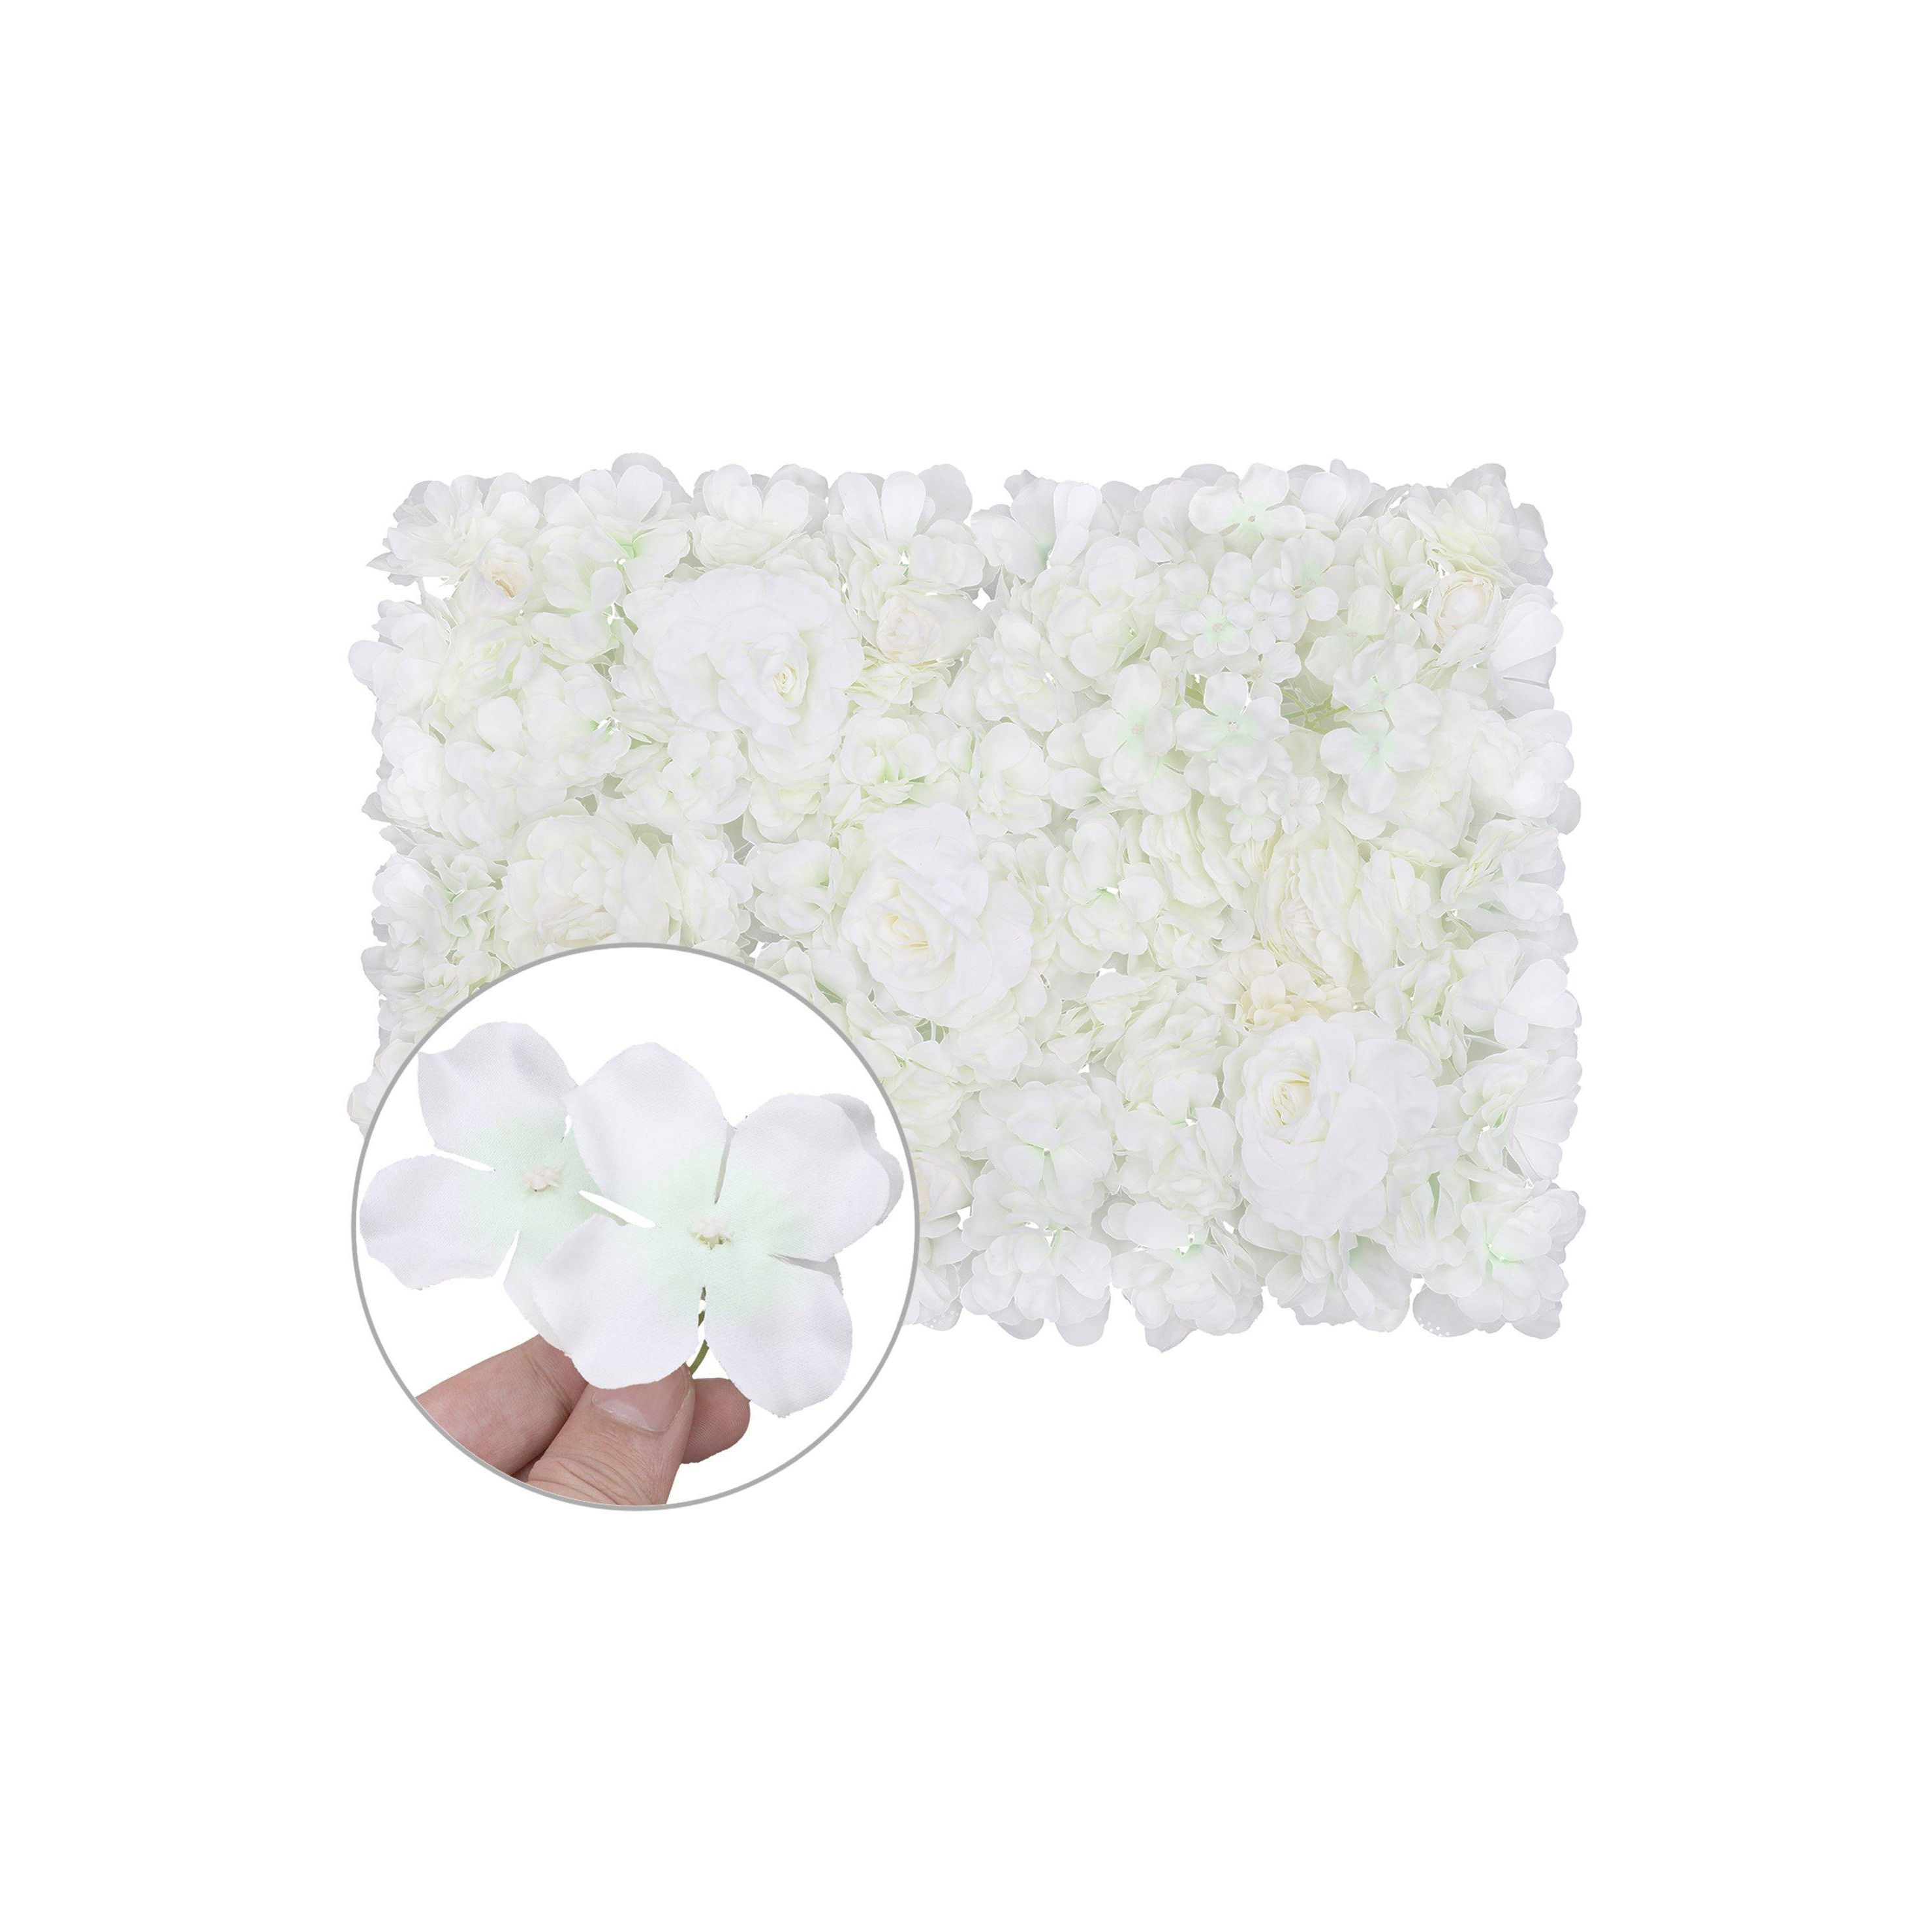 Artificial Flower Wall Panel Decorative Wedding Photography Backdrop - image 1